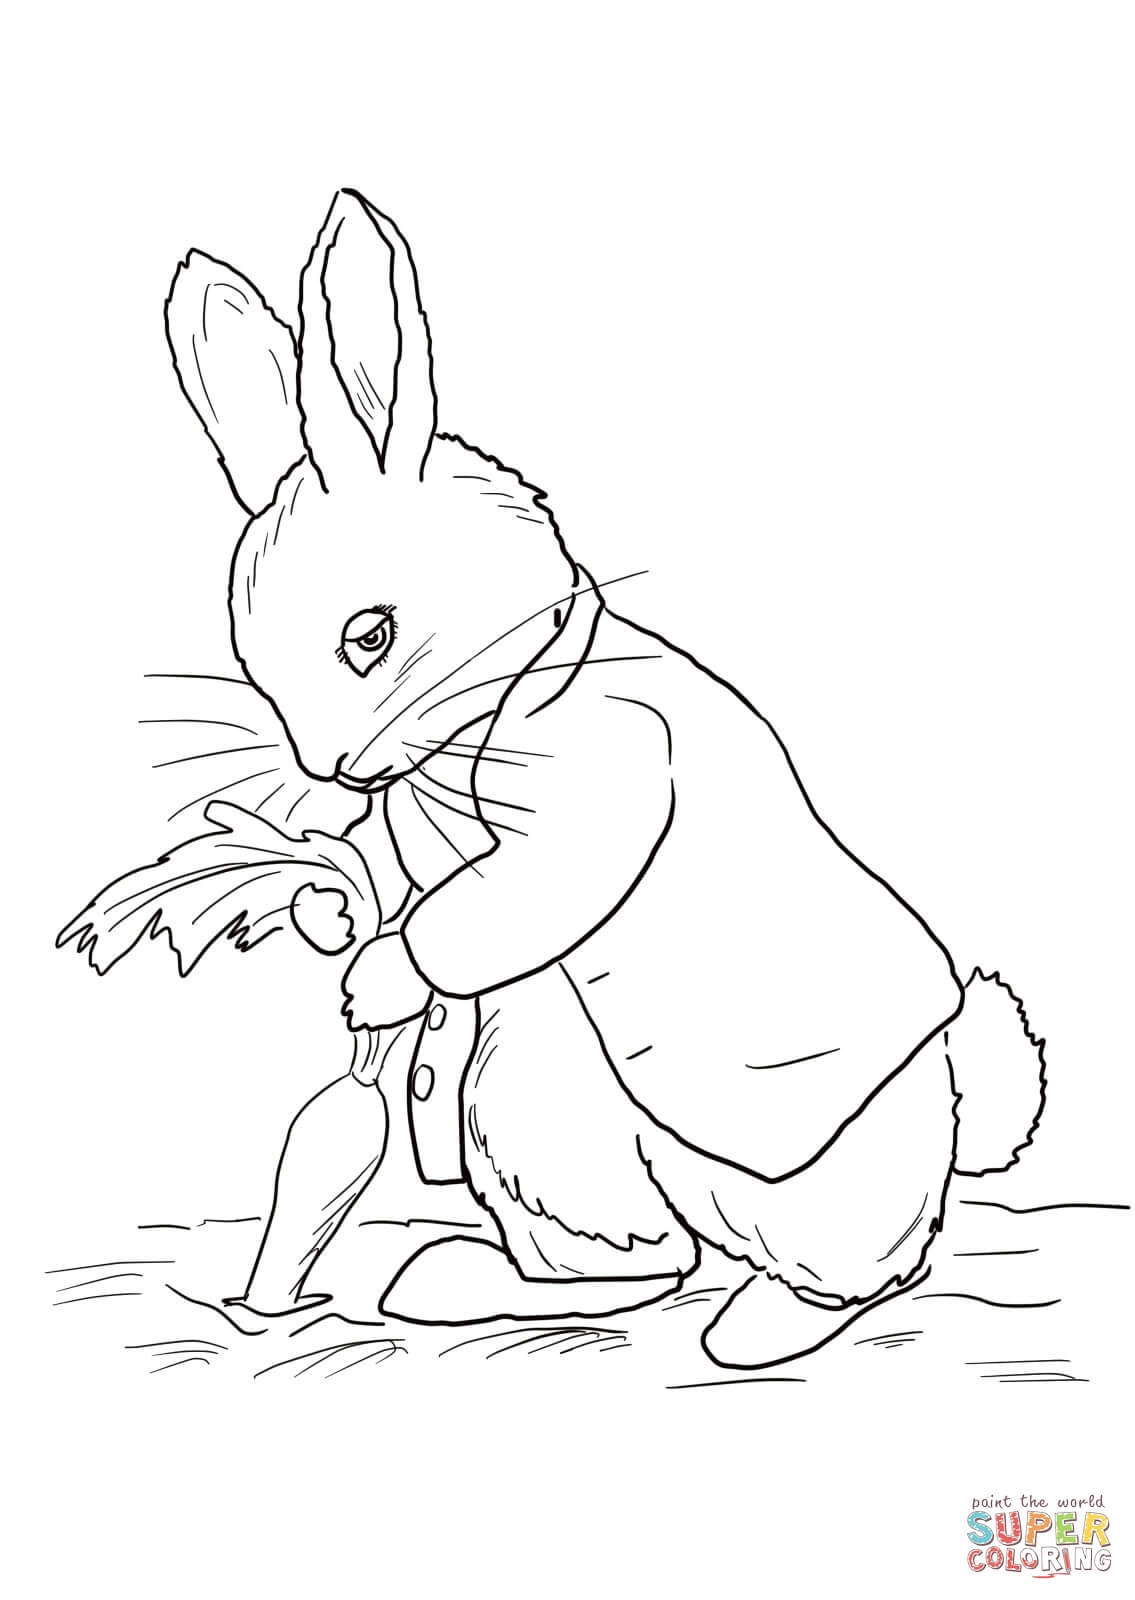 Peter Rabbit Stealing Carrots Coloring Page | Free Printable - Free Printable Peter Rabbit Coloring Pages